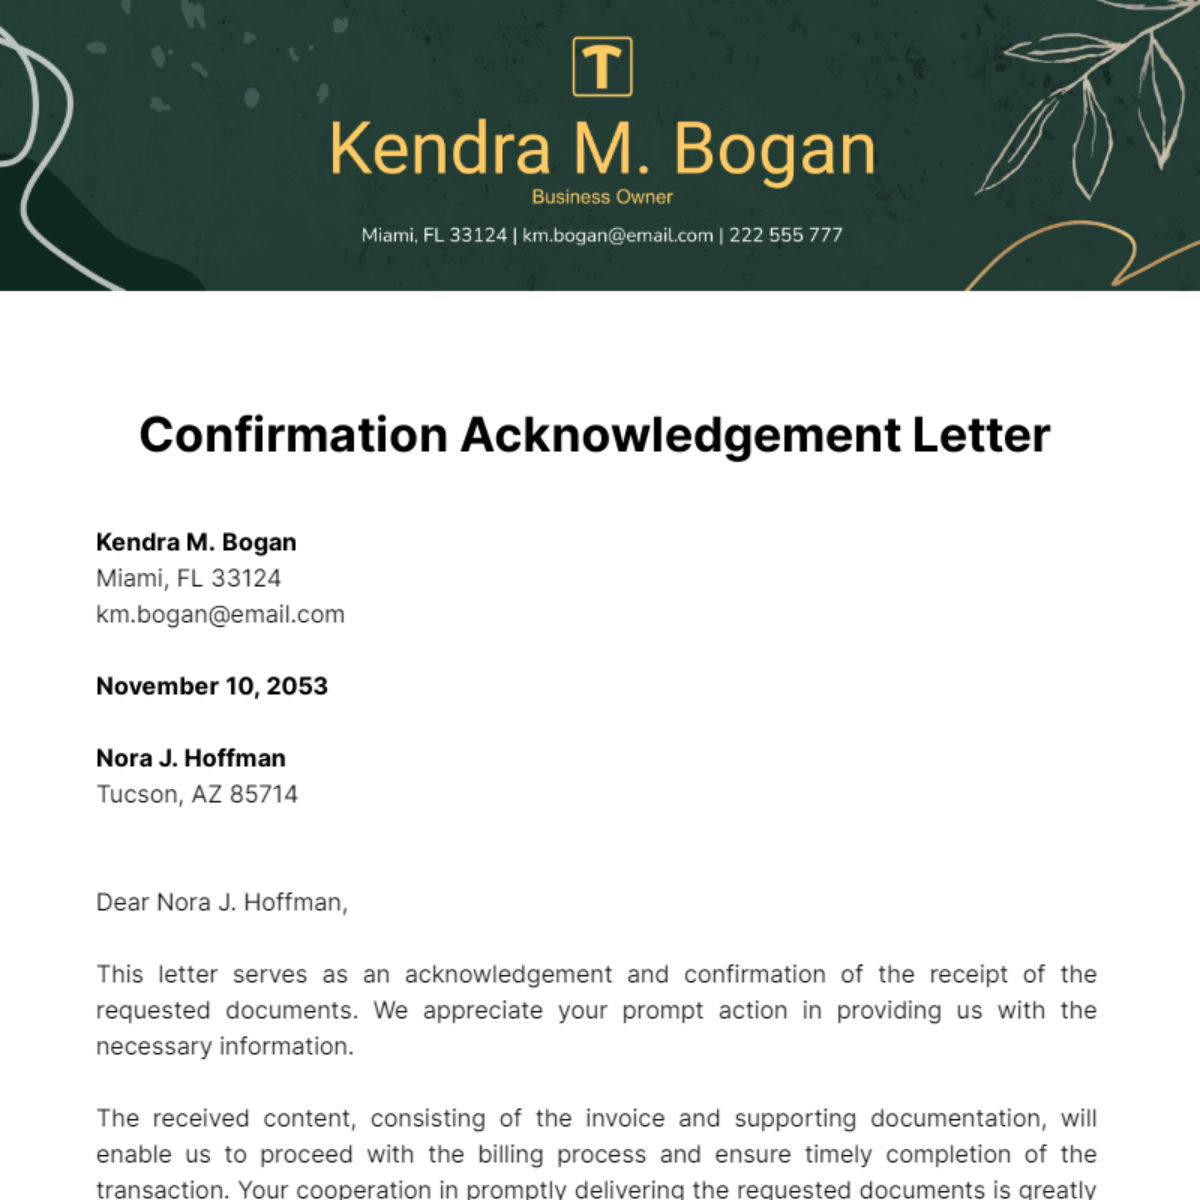 Confirmation Acknowledgement Letter Template